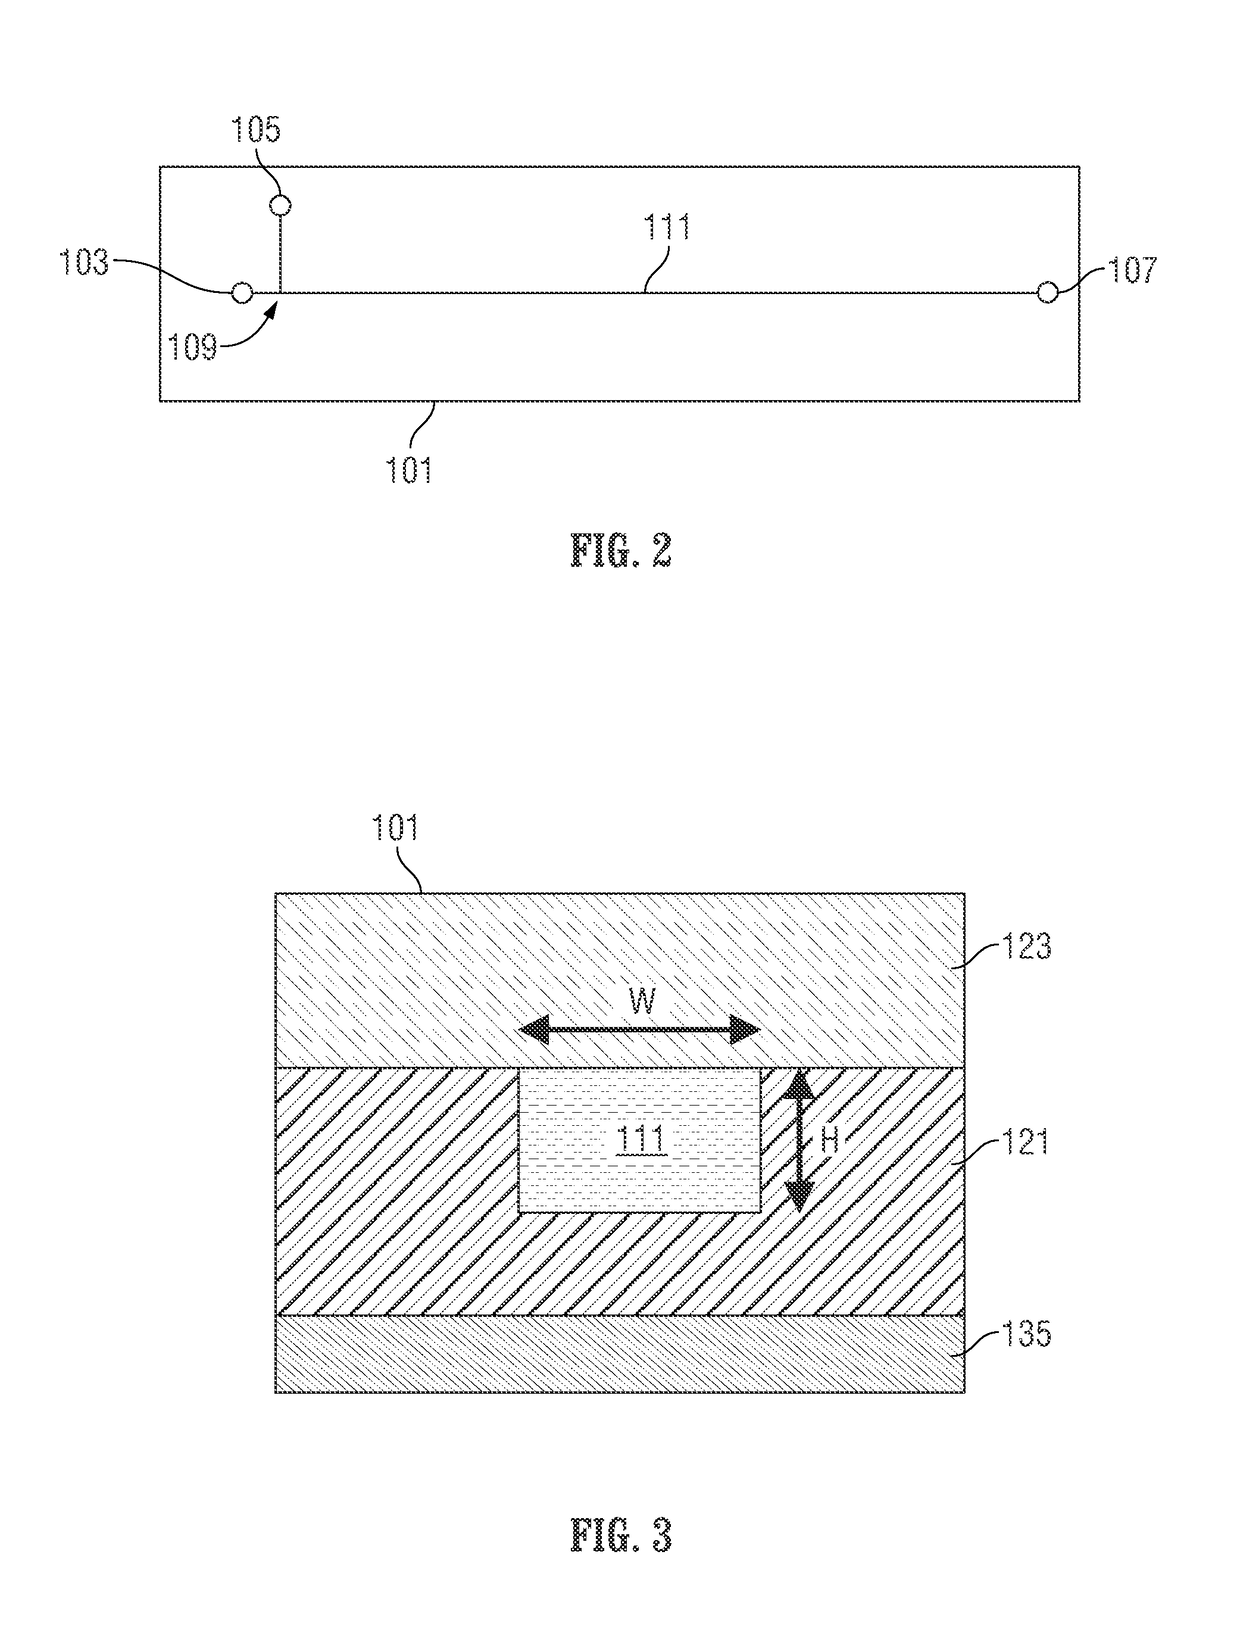 Method and apparatus for characterizing clathrate hydrate formation conditions employing microfluidic device